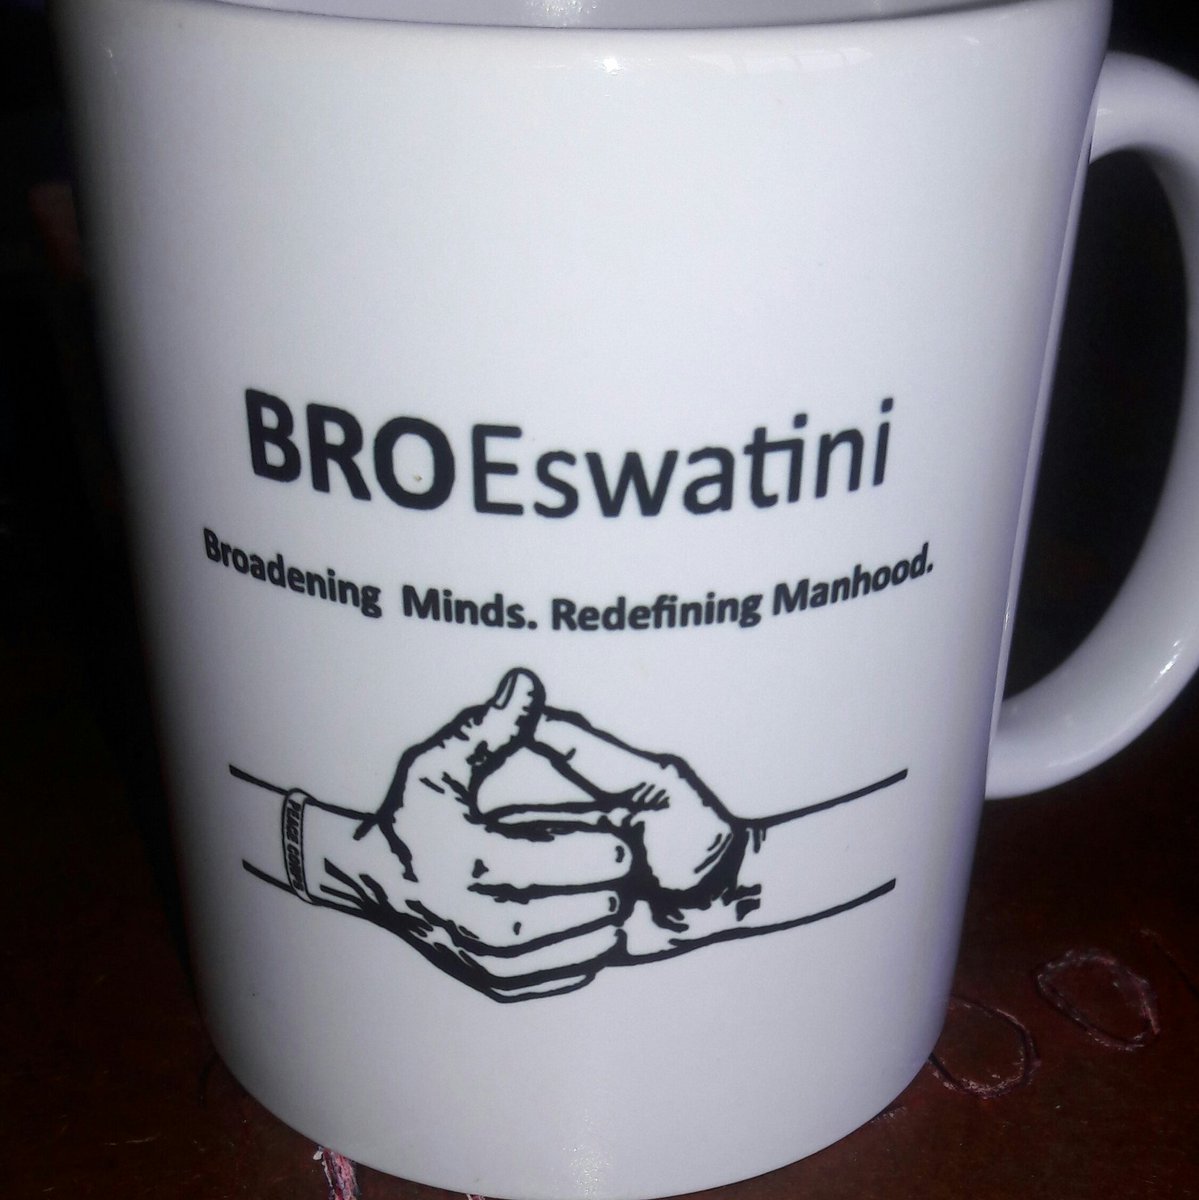 Having my coffee from my BRO ESwatini cup this morning  as we celebrate International Man's day today.
#IAmBRO
#RedefiningManhood..
Enjoy this day brothers!😍 You matter!!